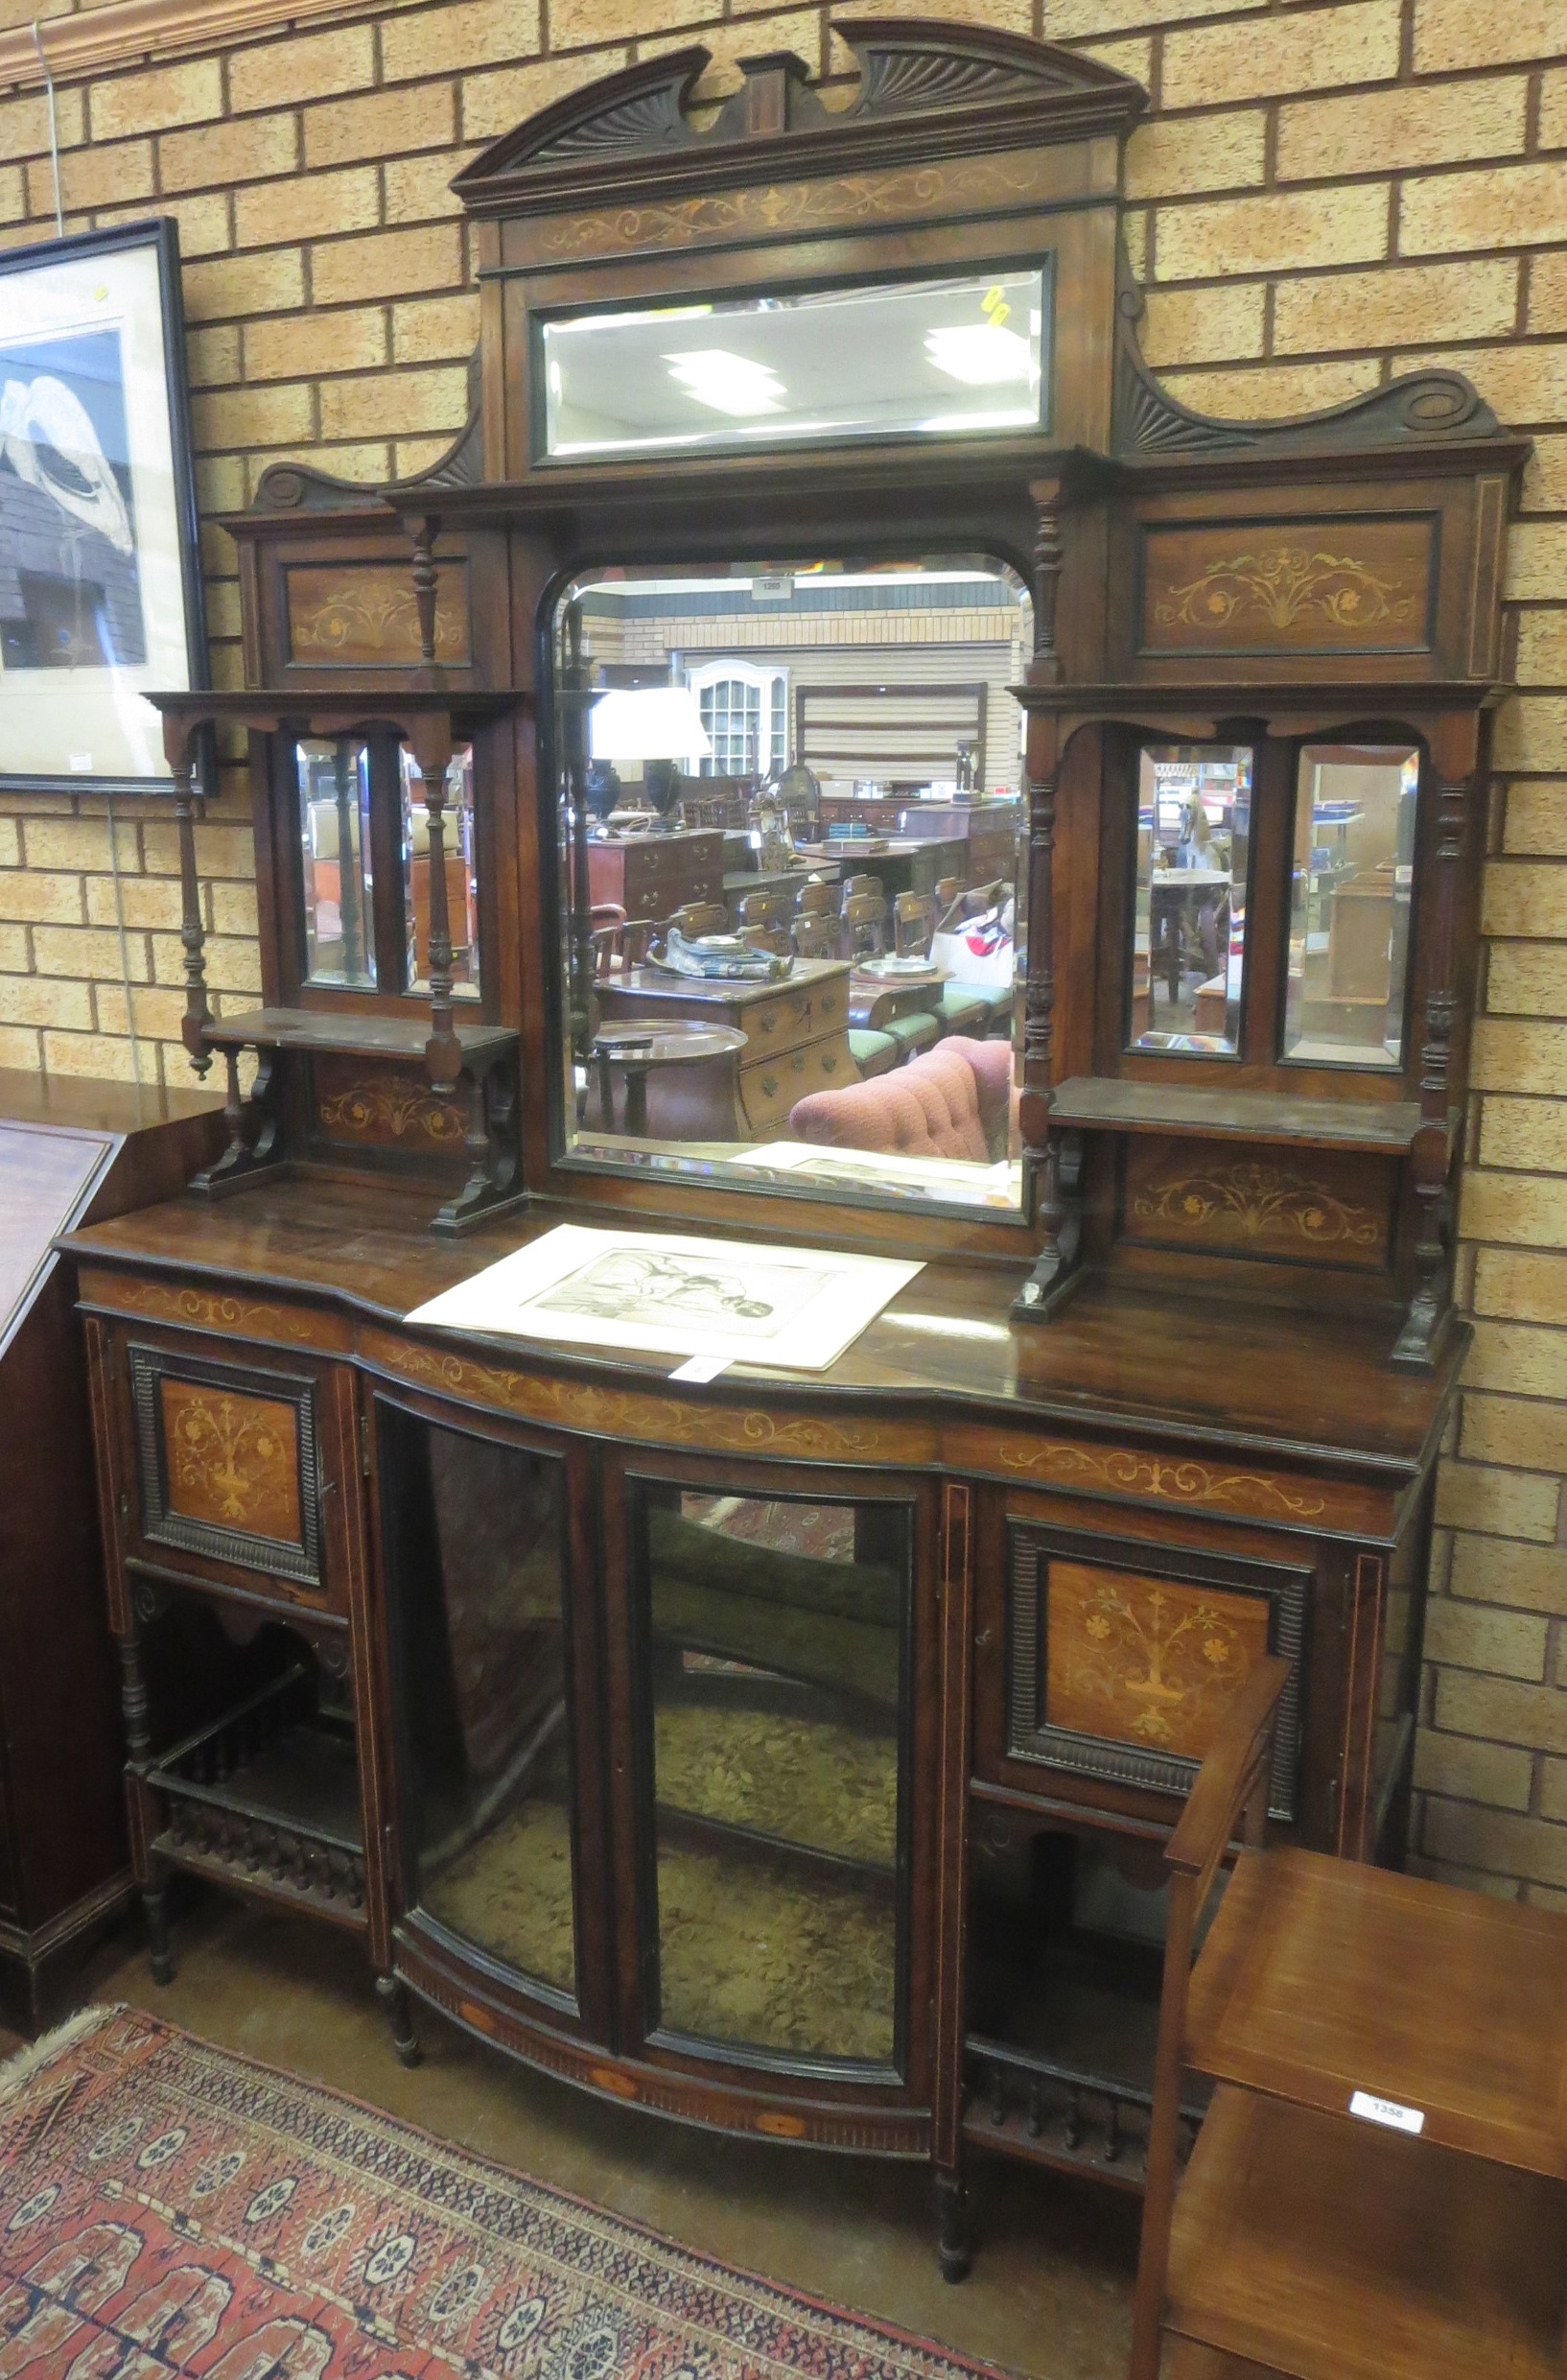 A Victorian rosewood and inlaid Credenza with mirror back, 7ft 6in H x 4ft 11in W